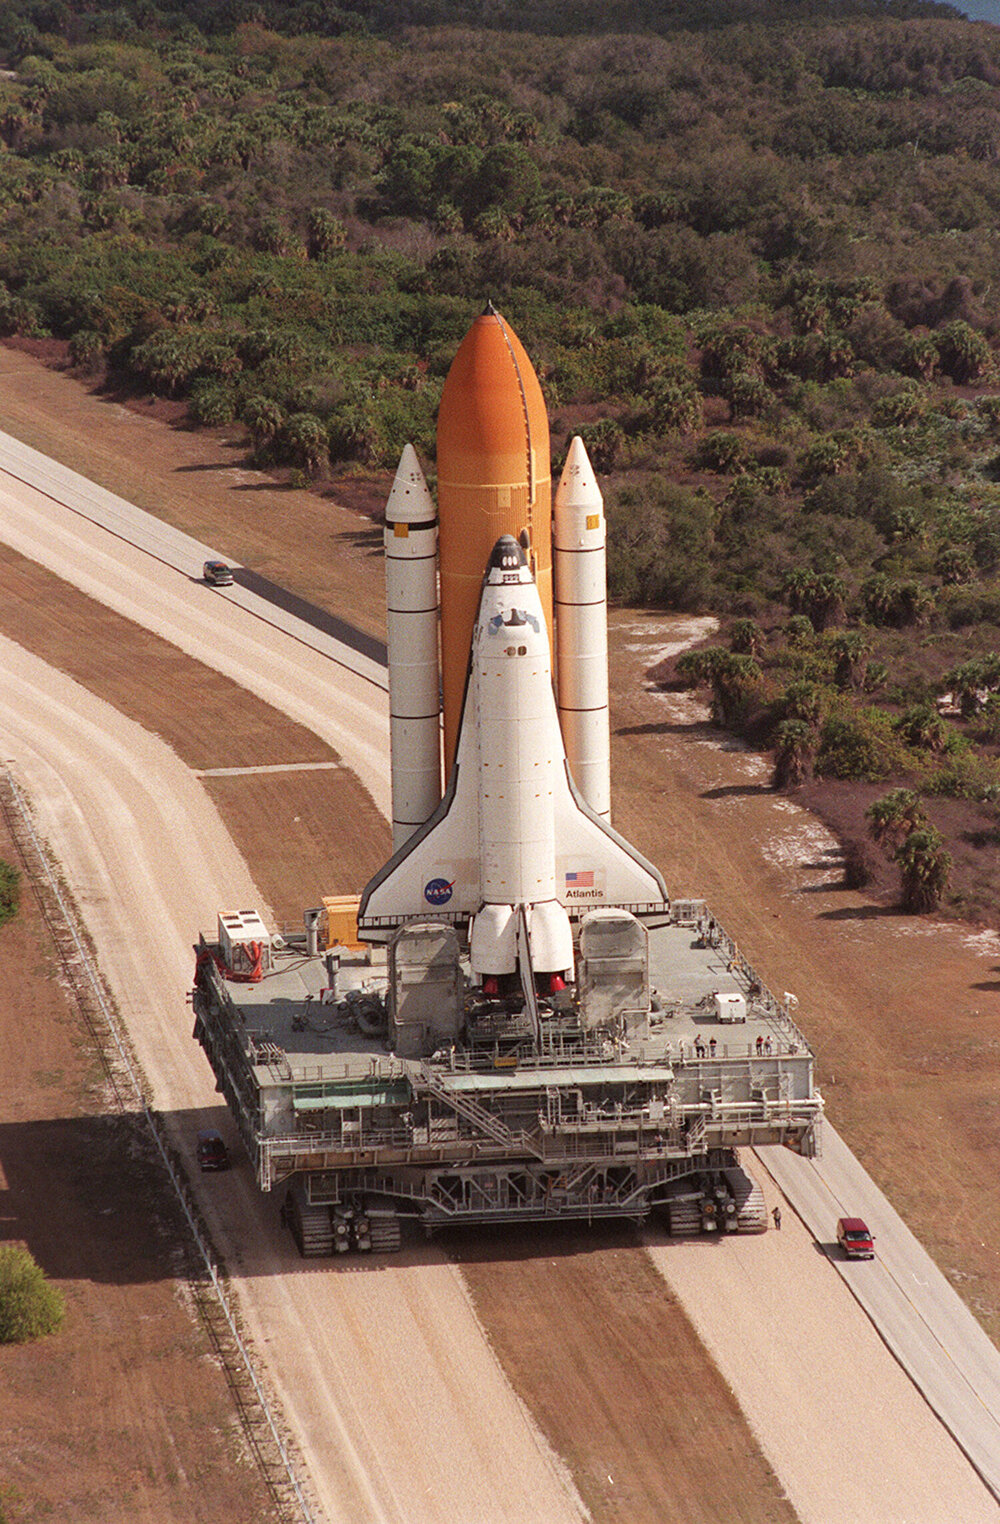 NASA Transport-Crawler taking the Atlantis Space Shuttle to the launch pad.